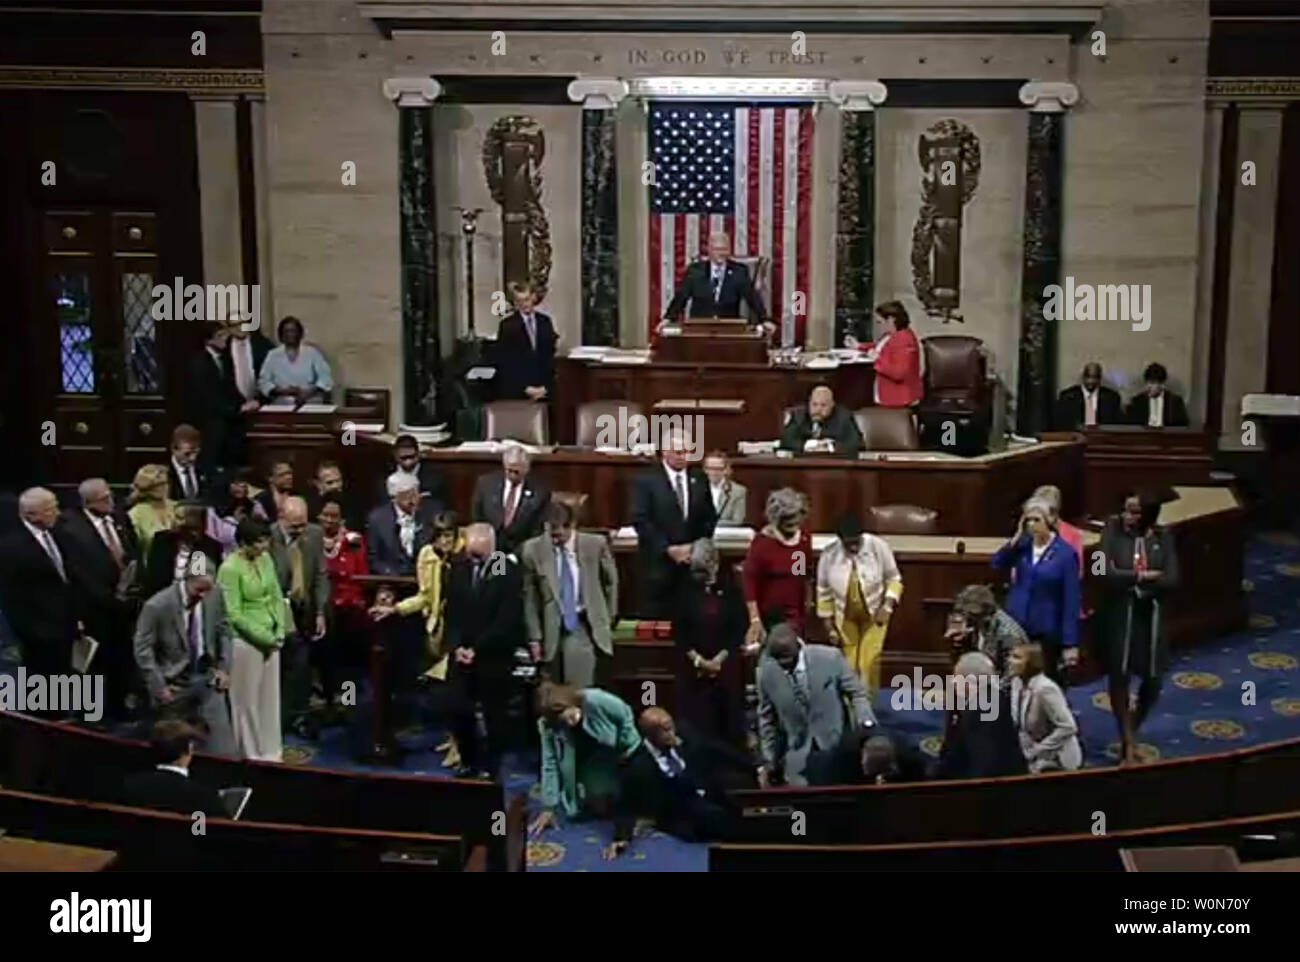 House Democrats stage a sit-in in an attempt to force a gun control vote on the floor of the House Chambers of the U.S. Capitol Building in Washington, D.C. on June 22, 2016. Democrats are asking Speaker Paul Ryan to take up legislation on gun law reforms prior to an upcoming House recess. Photo by UPI Stock Photo